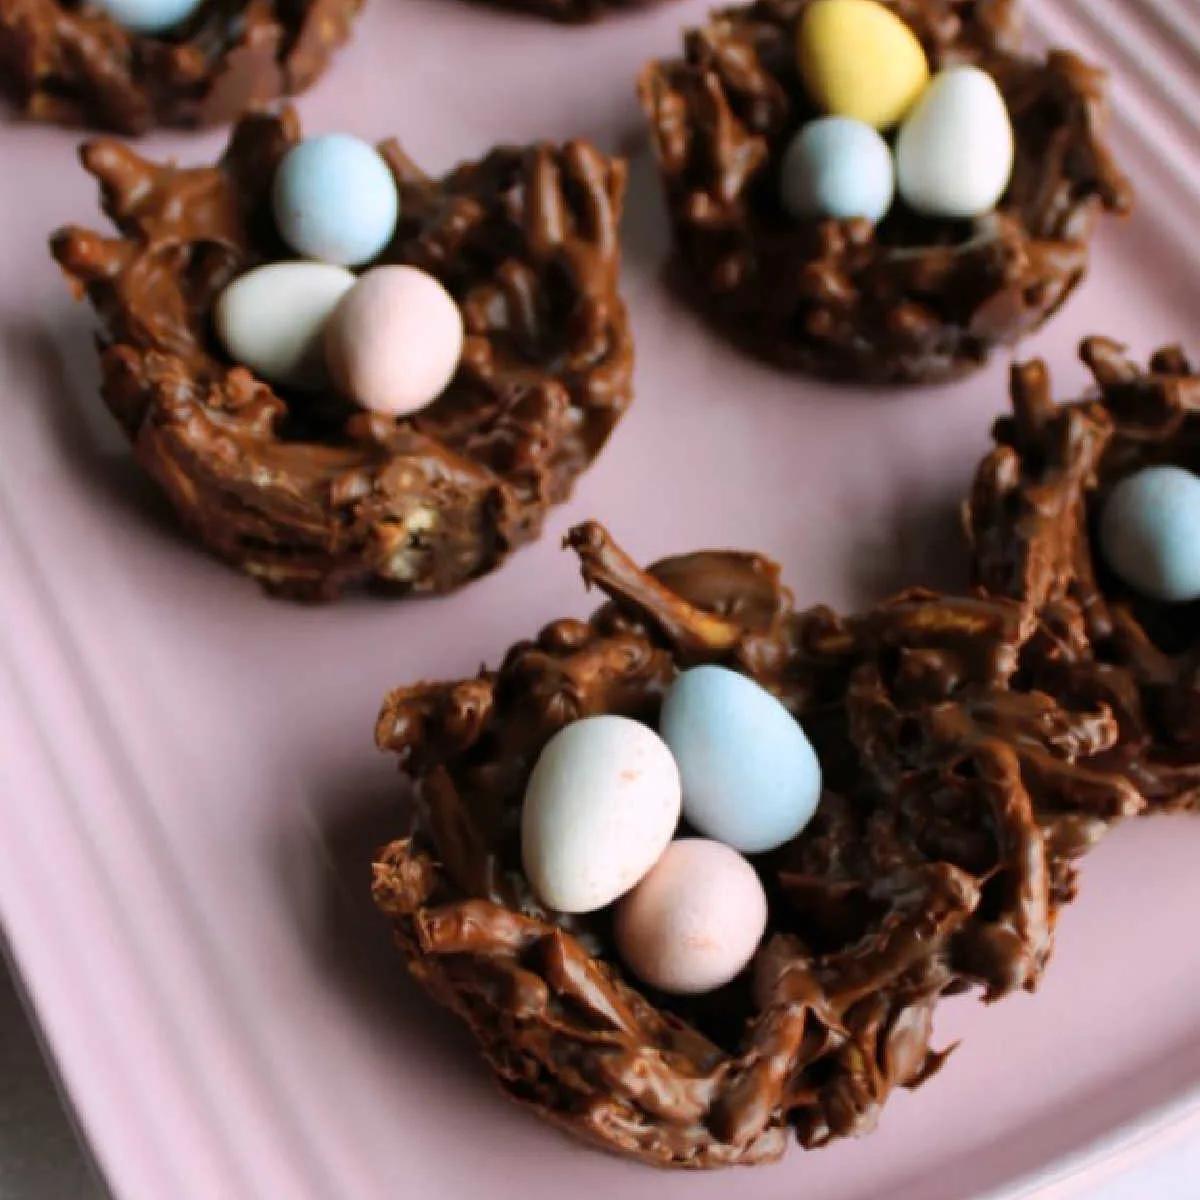 Treats shaped like birds nests made out of chocolate, peanut butter and crunchy chow mein noodles filled with pastel candy eggs on pink platter.